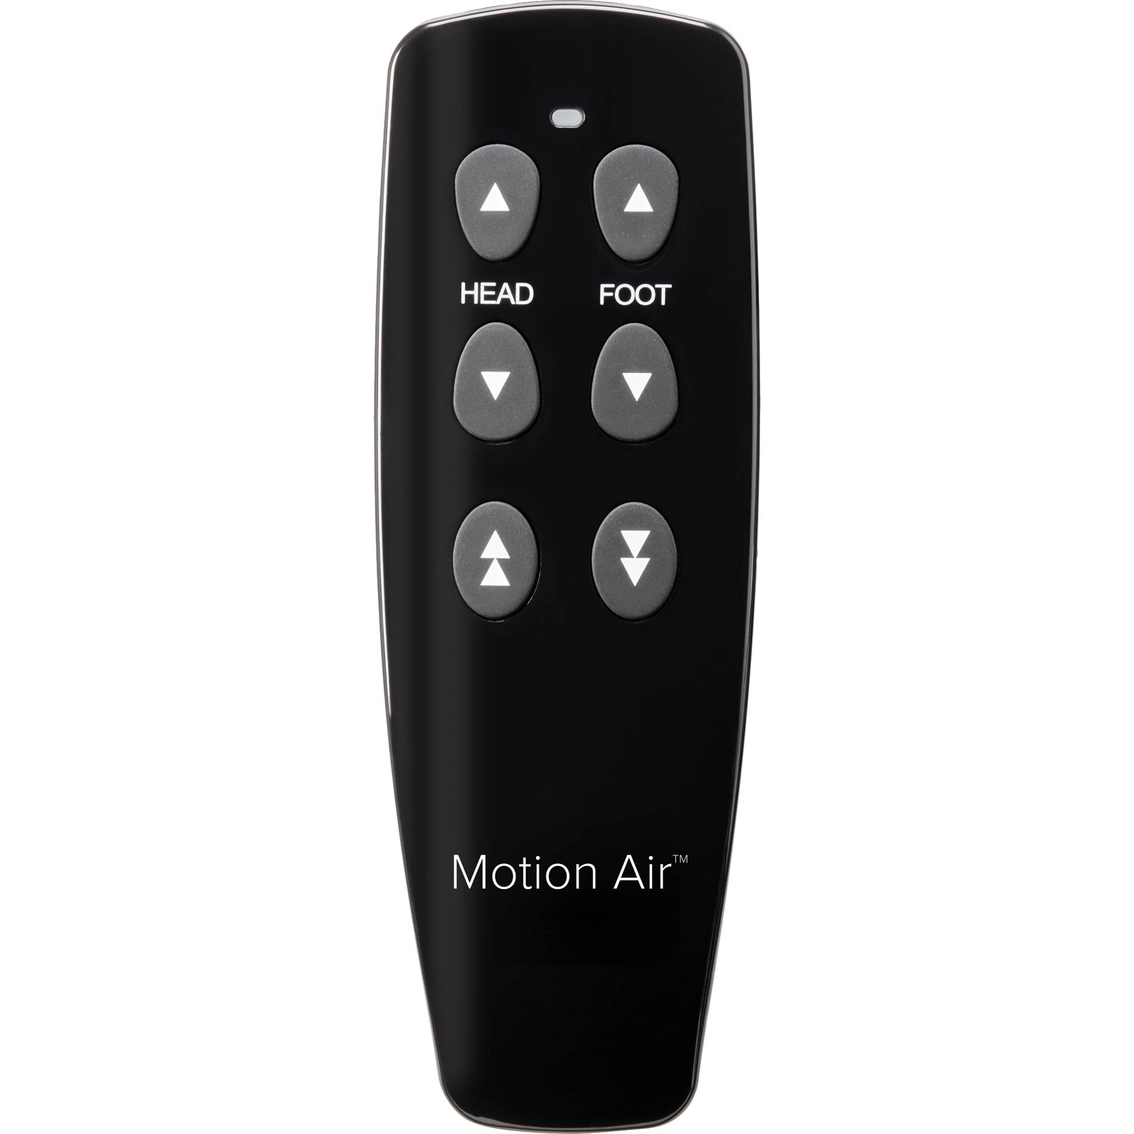 Beautyrest Motion Air Adjustable Foundation - Image 4 of 4